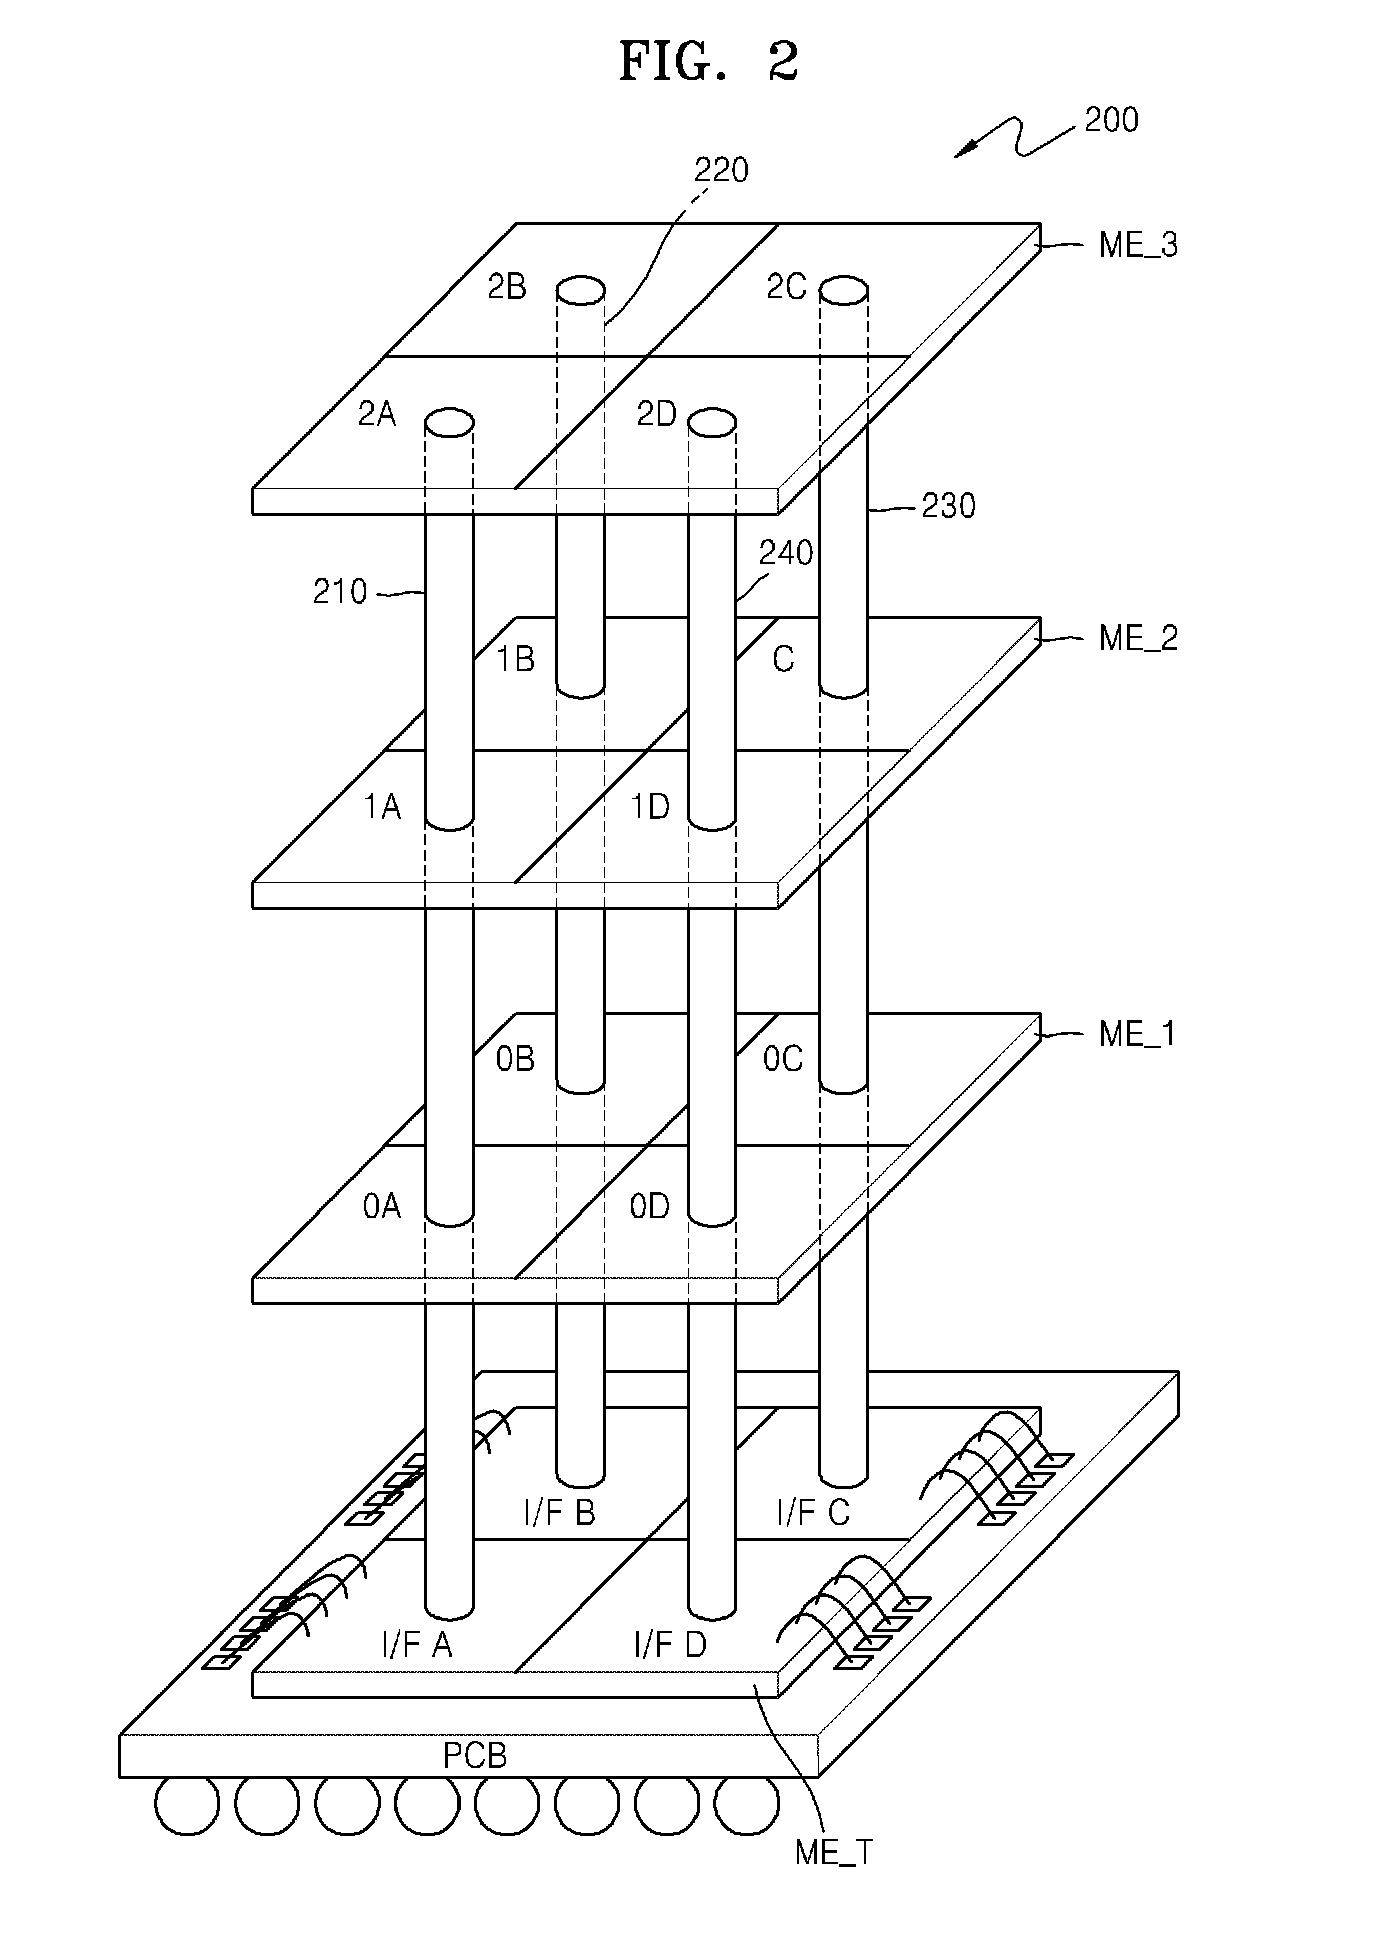 Process variation compensated multi-chip memory package